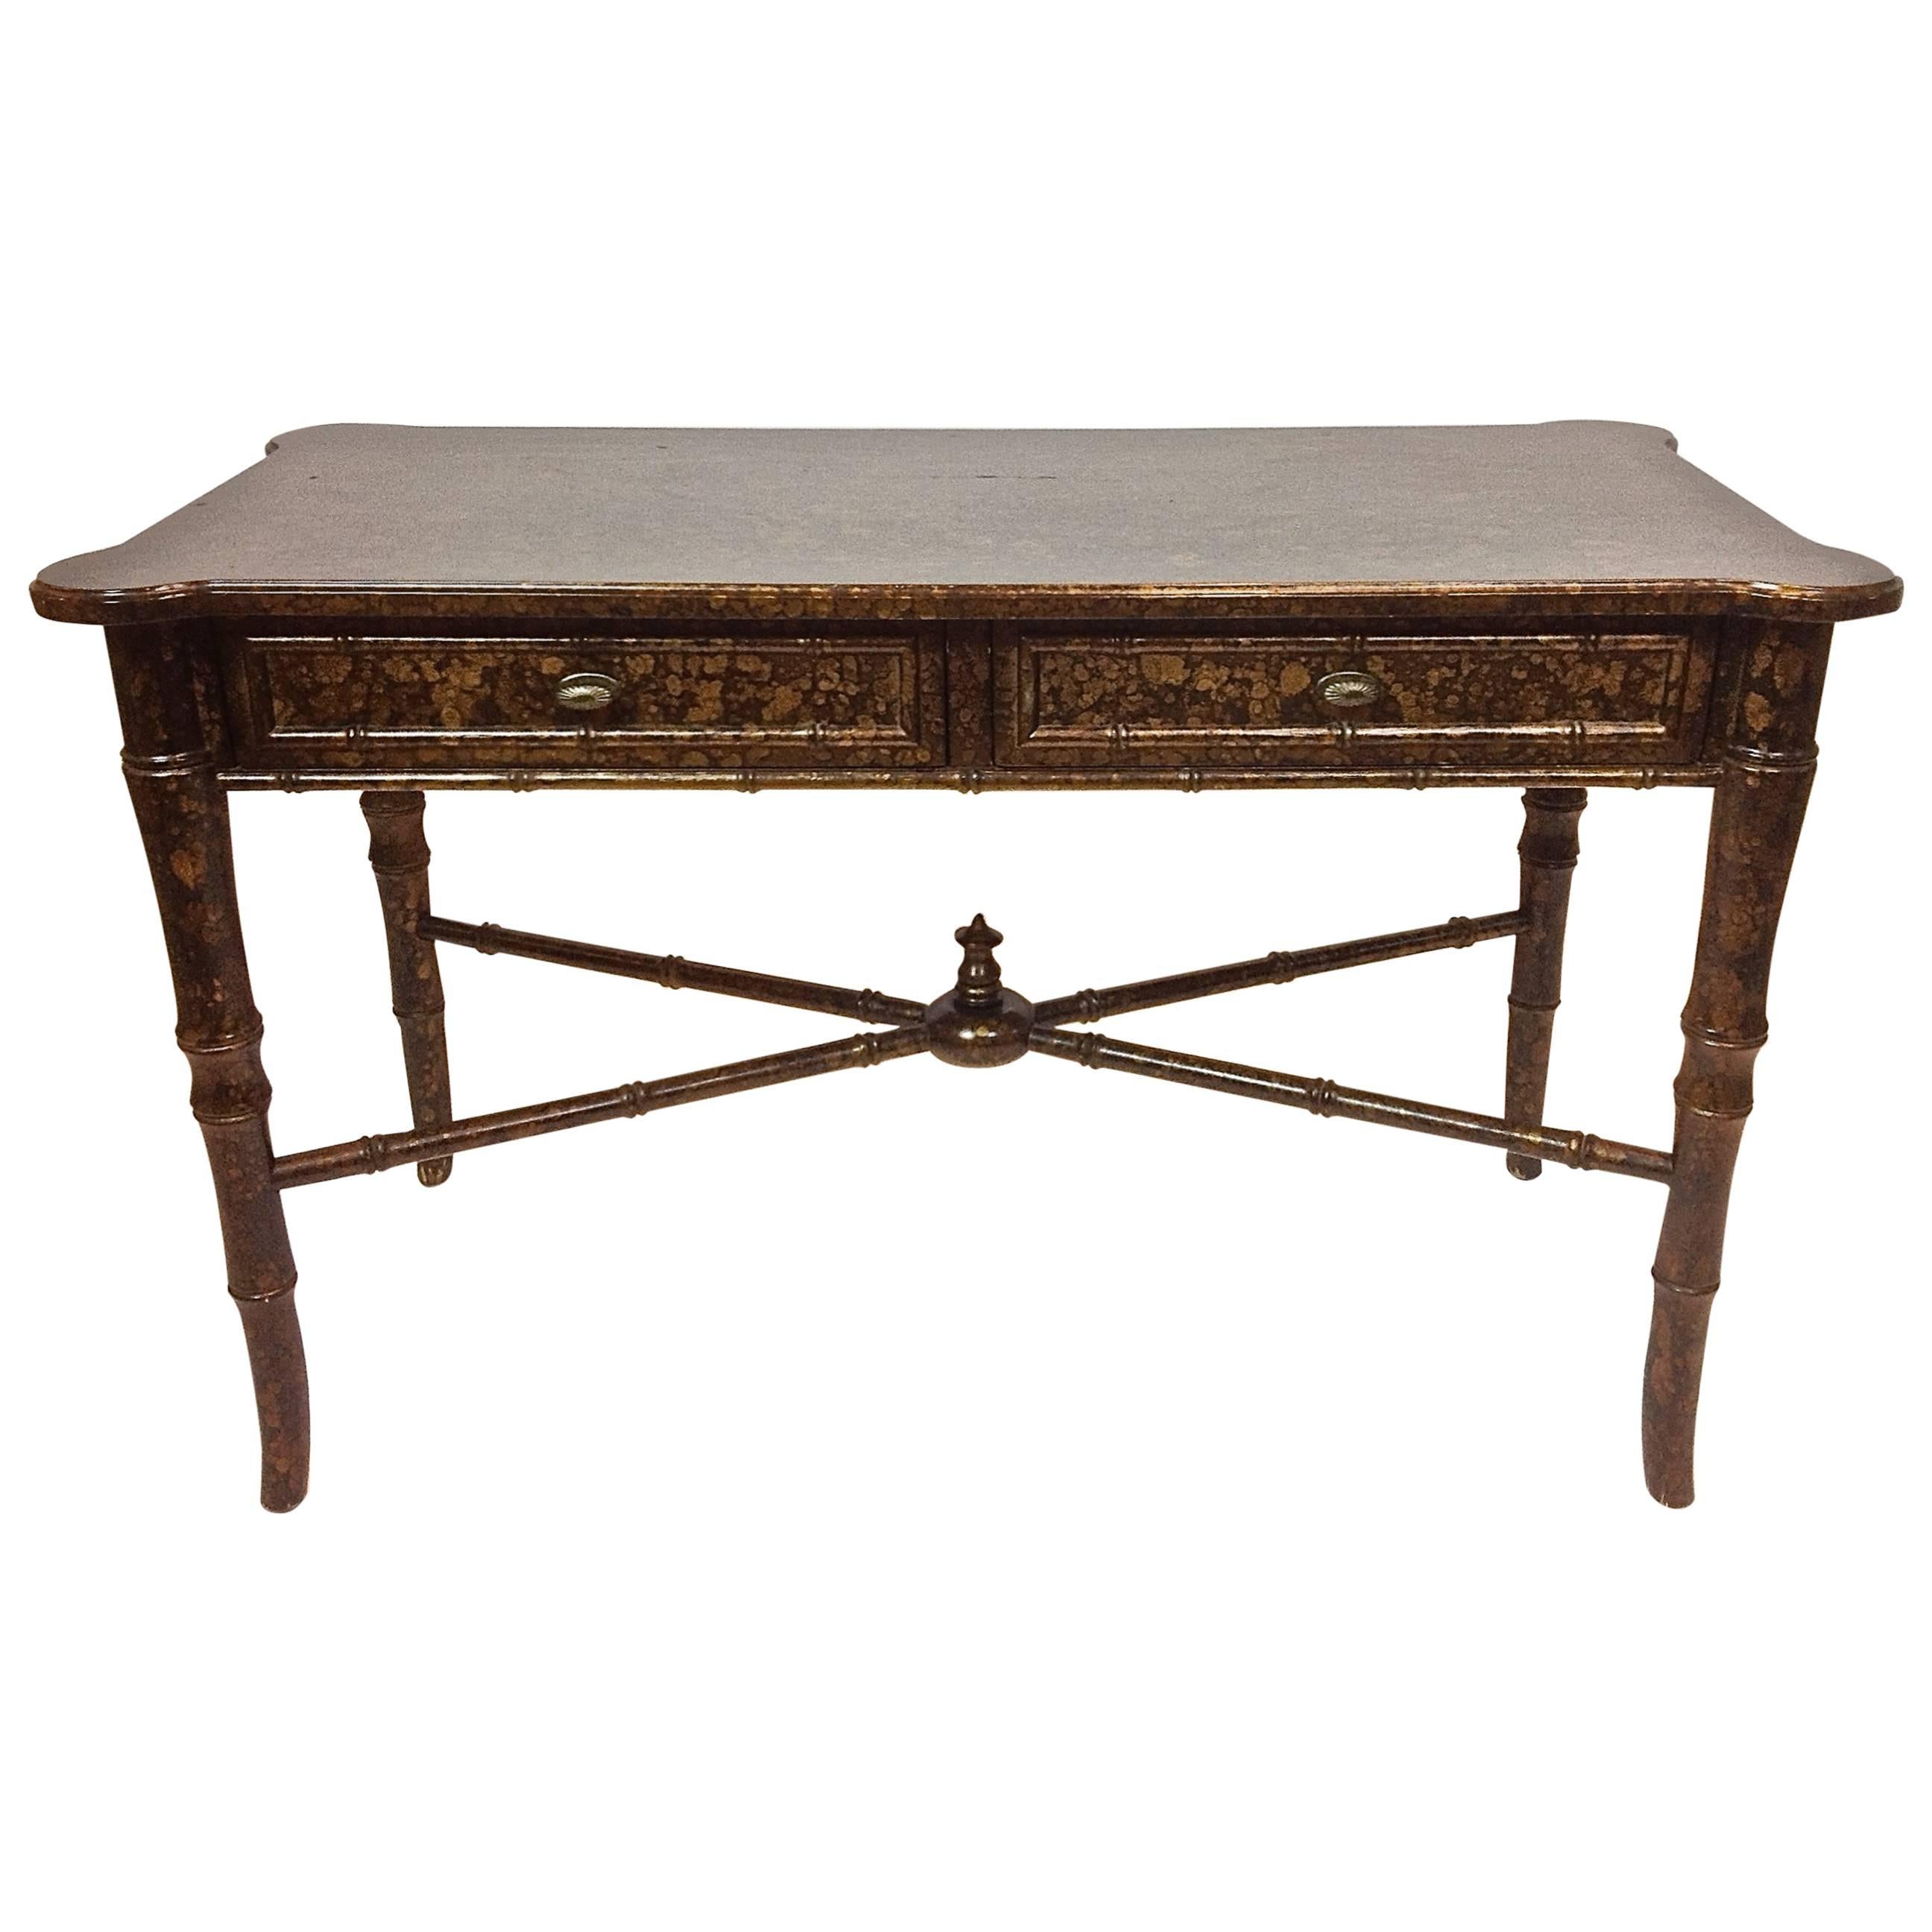 Fantastic wood writing table/desk in faux tortoise shell and bamboo design. Two drawers with metal pulls. Design includes lower crisscross rungs with centre dome detail. The matching chair is just as fantastic in the same tortoise shell and bamboo